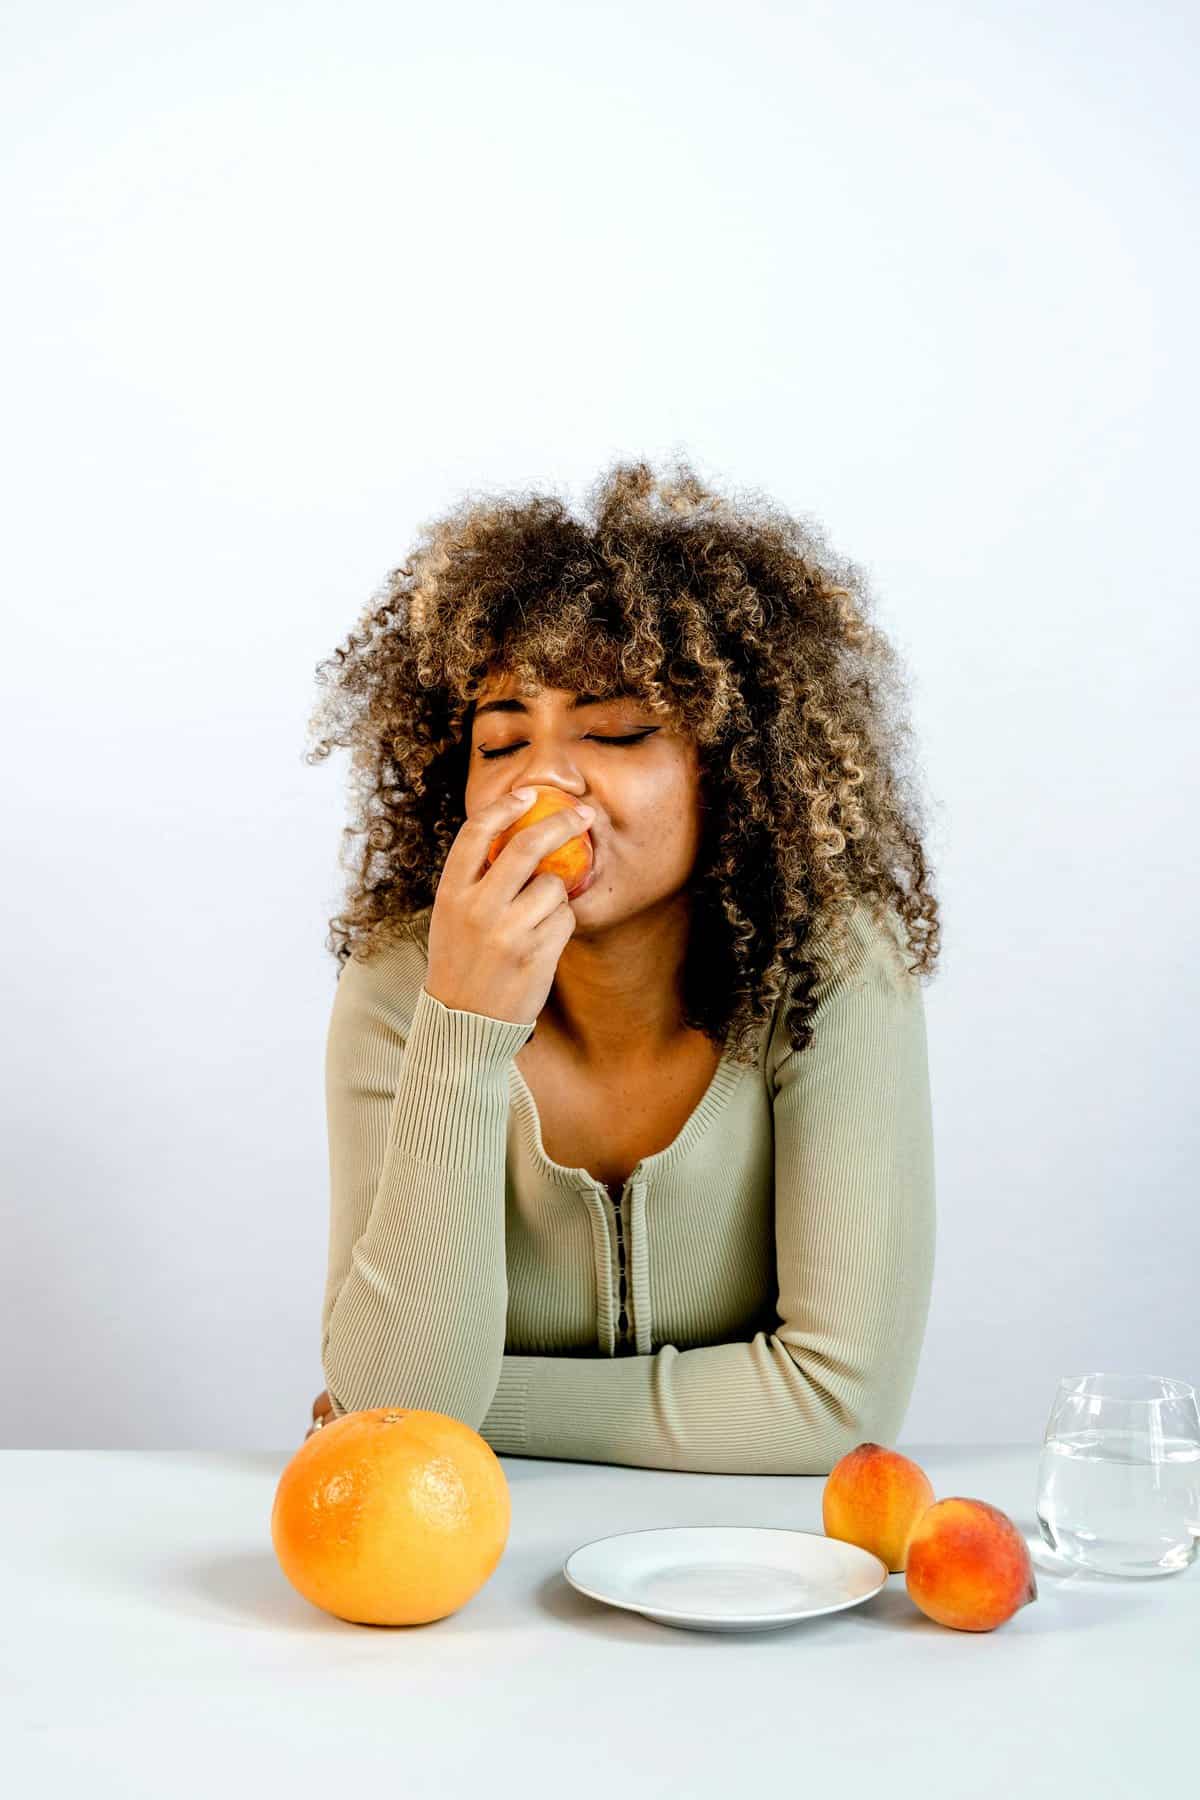 Woman eating an orange on the frugivore diet.